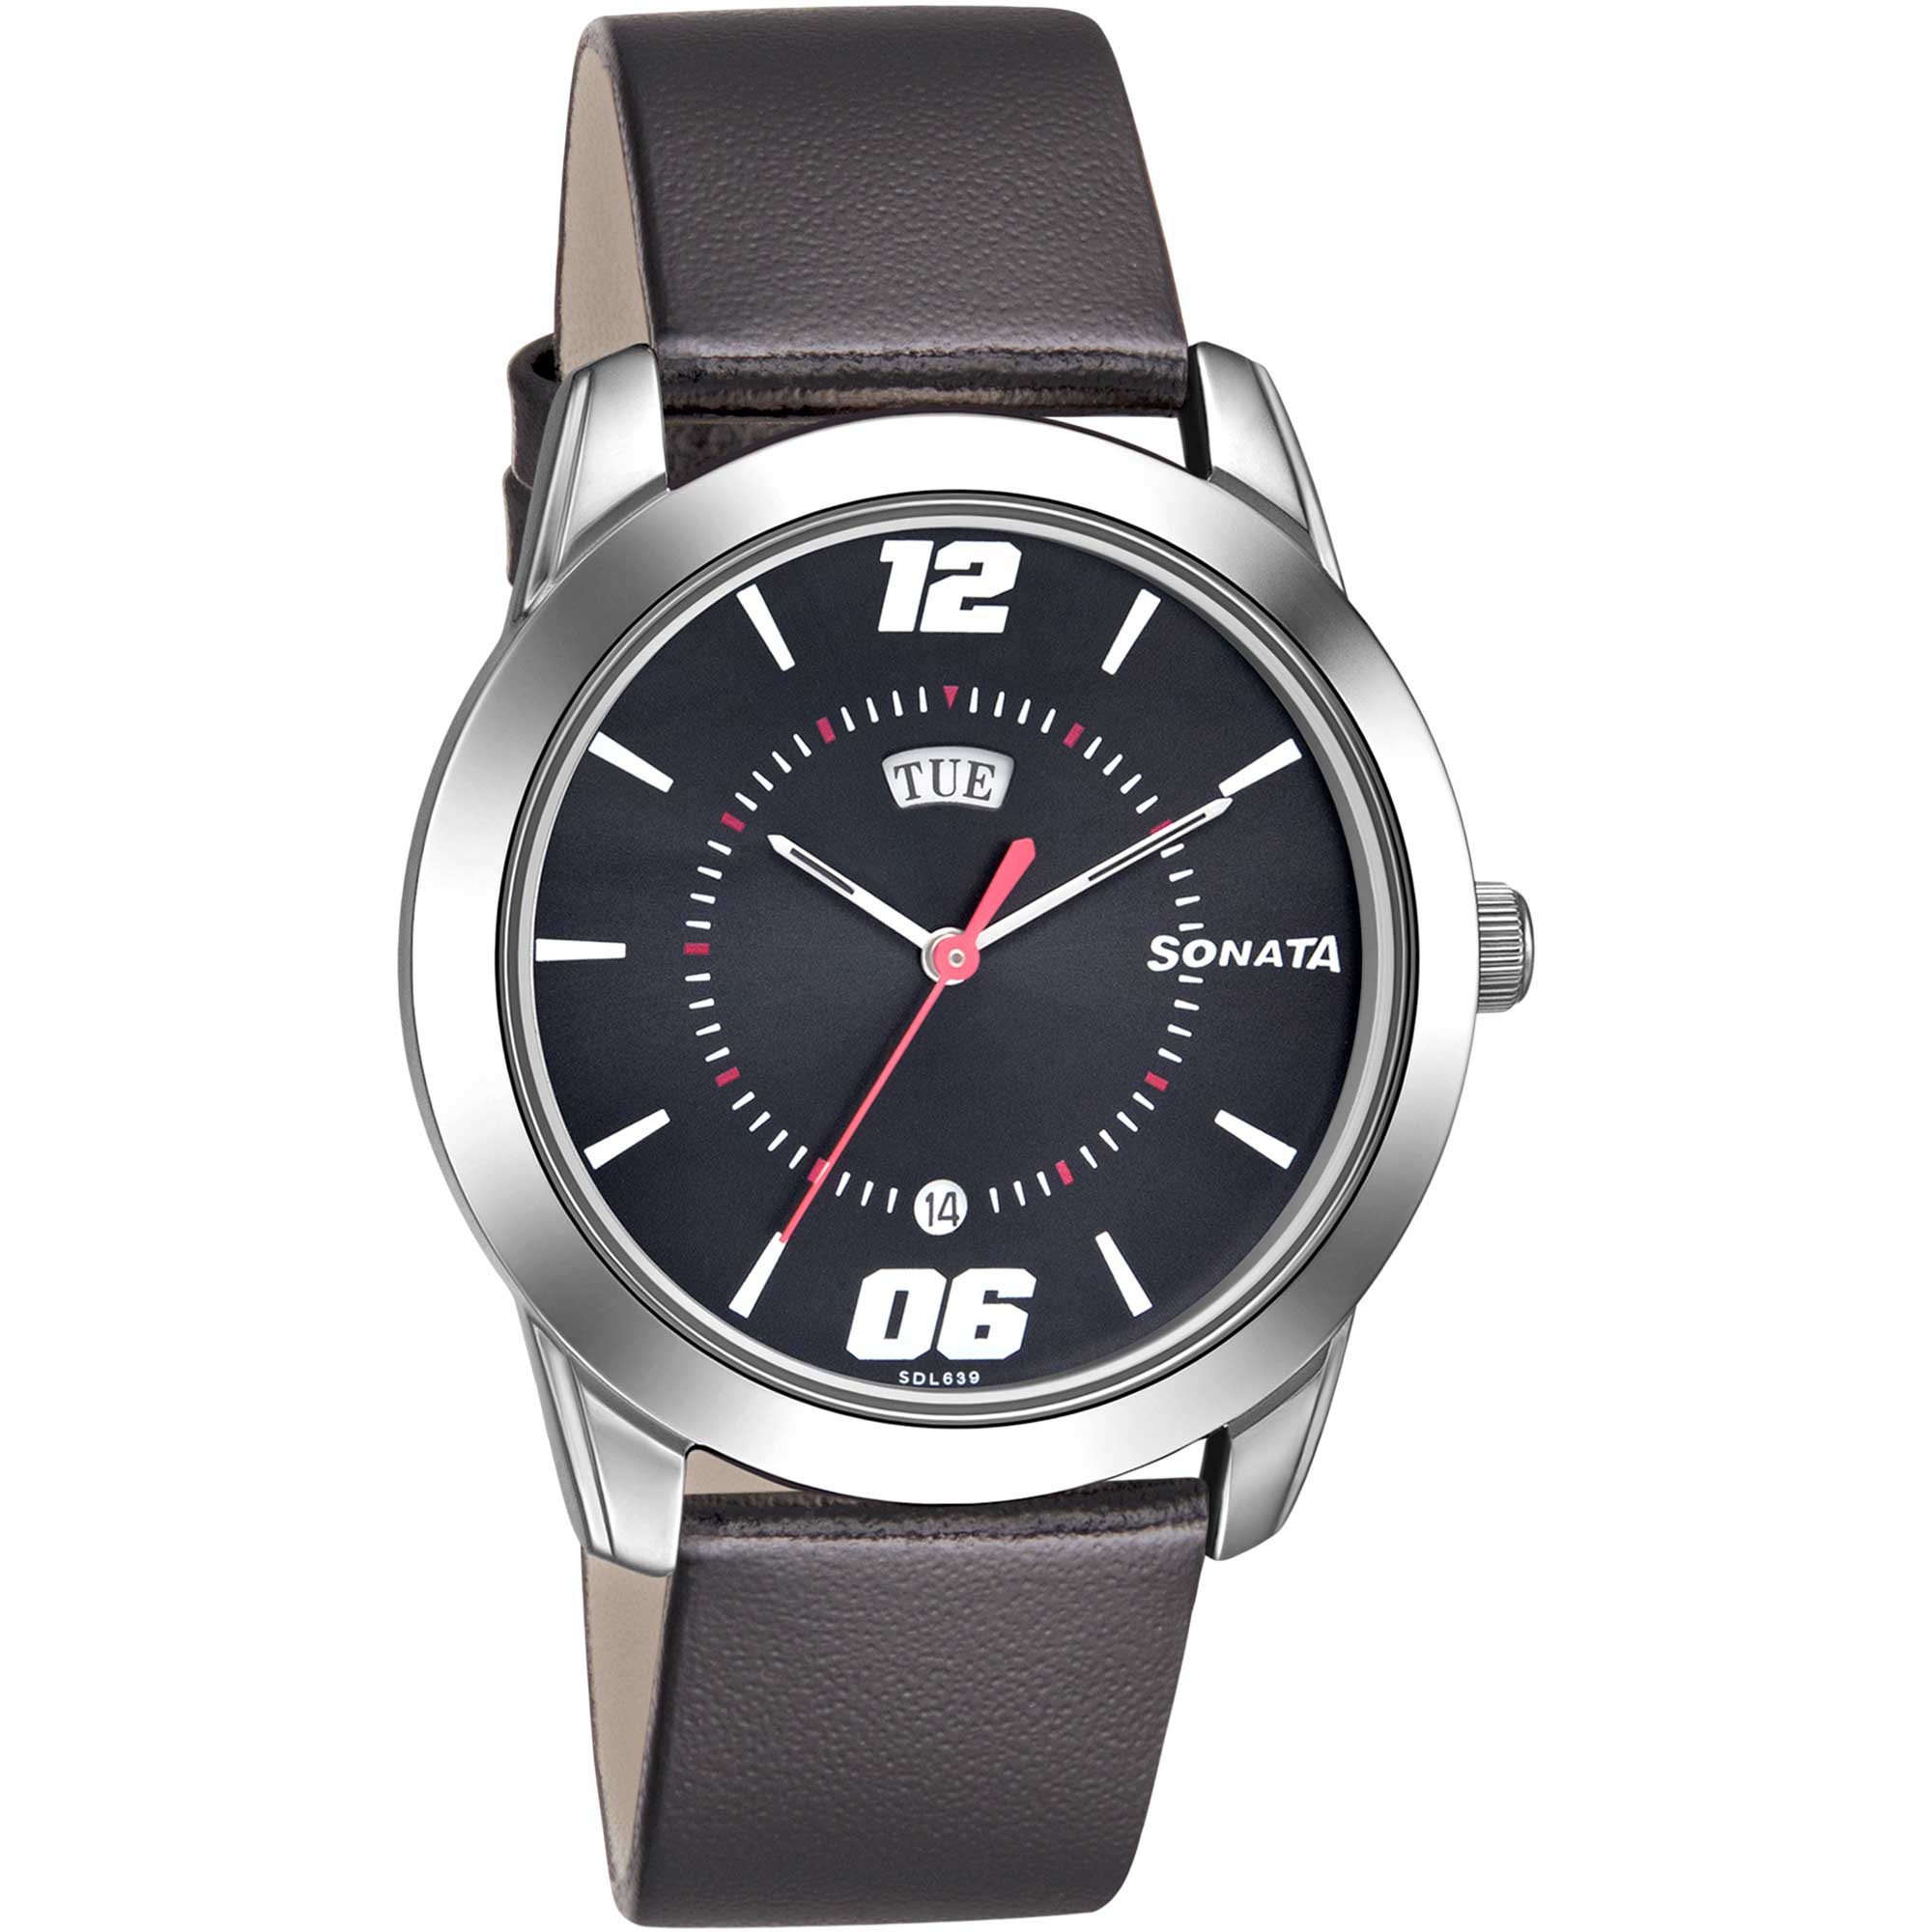 Sonata Quartz Analog with Day and Date Black Dial Leather Strap Watch for Men